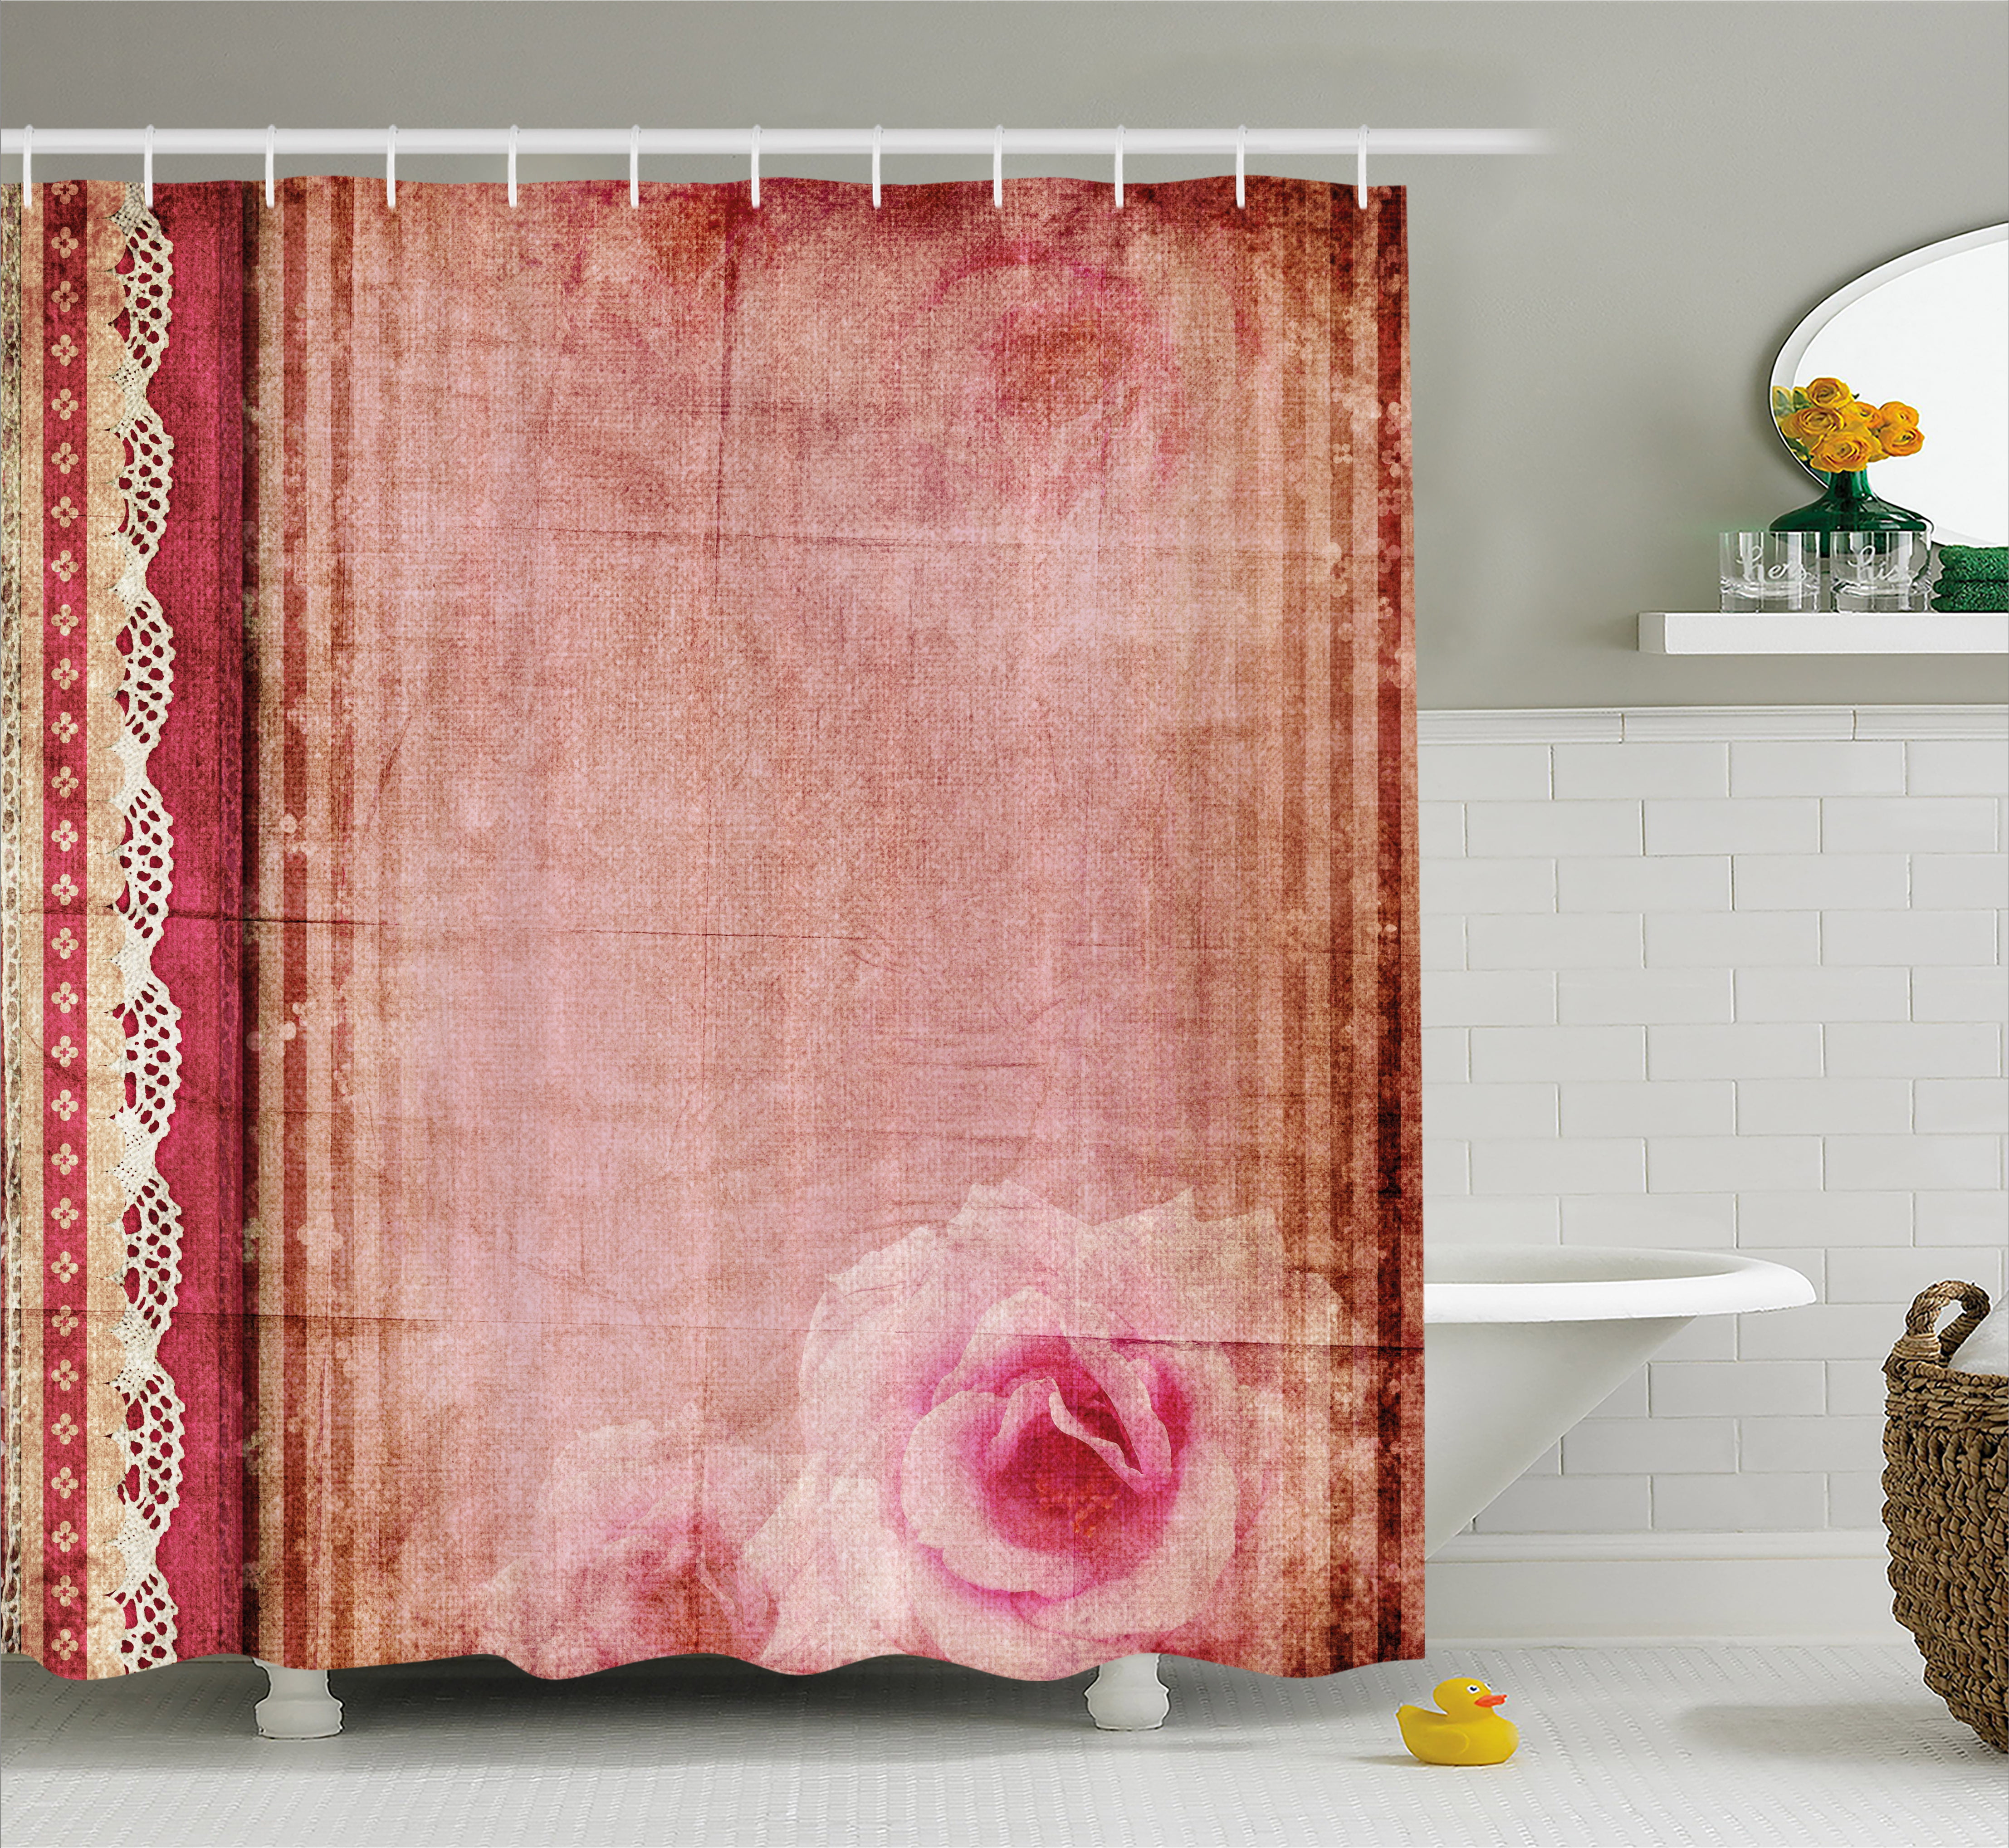 Shabby Chic Shower Curtain, Vintage Style Frame with Lace Inspired ...